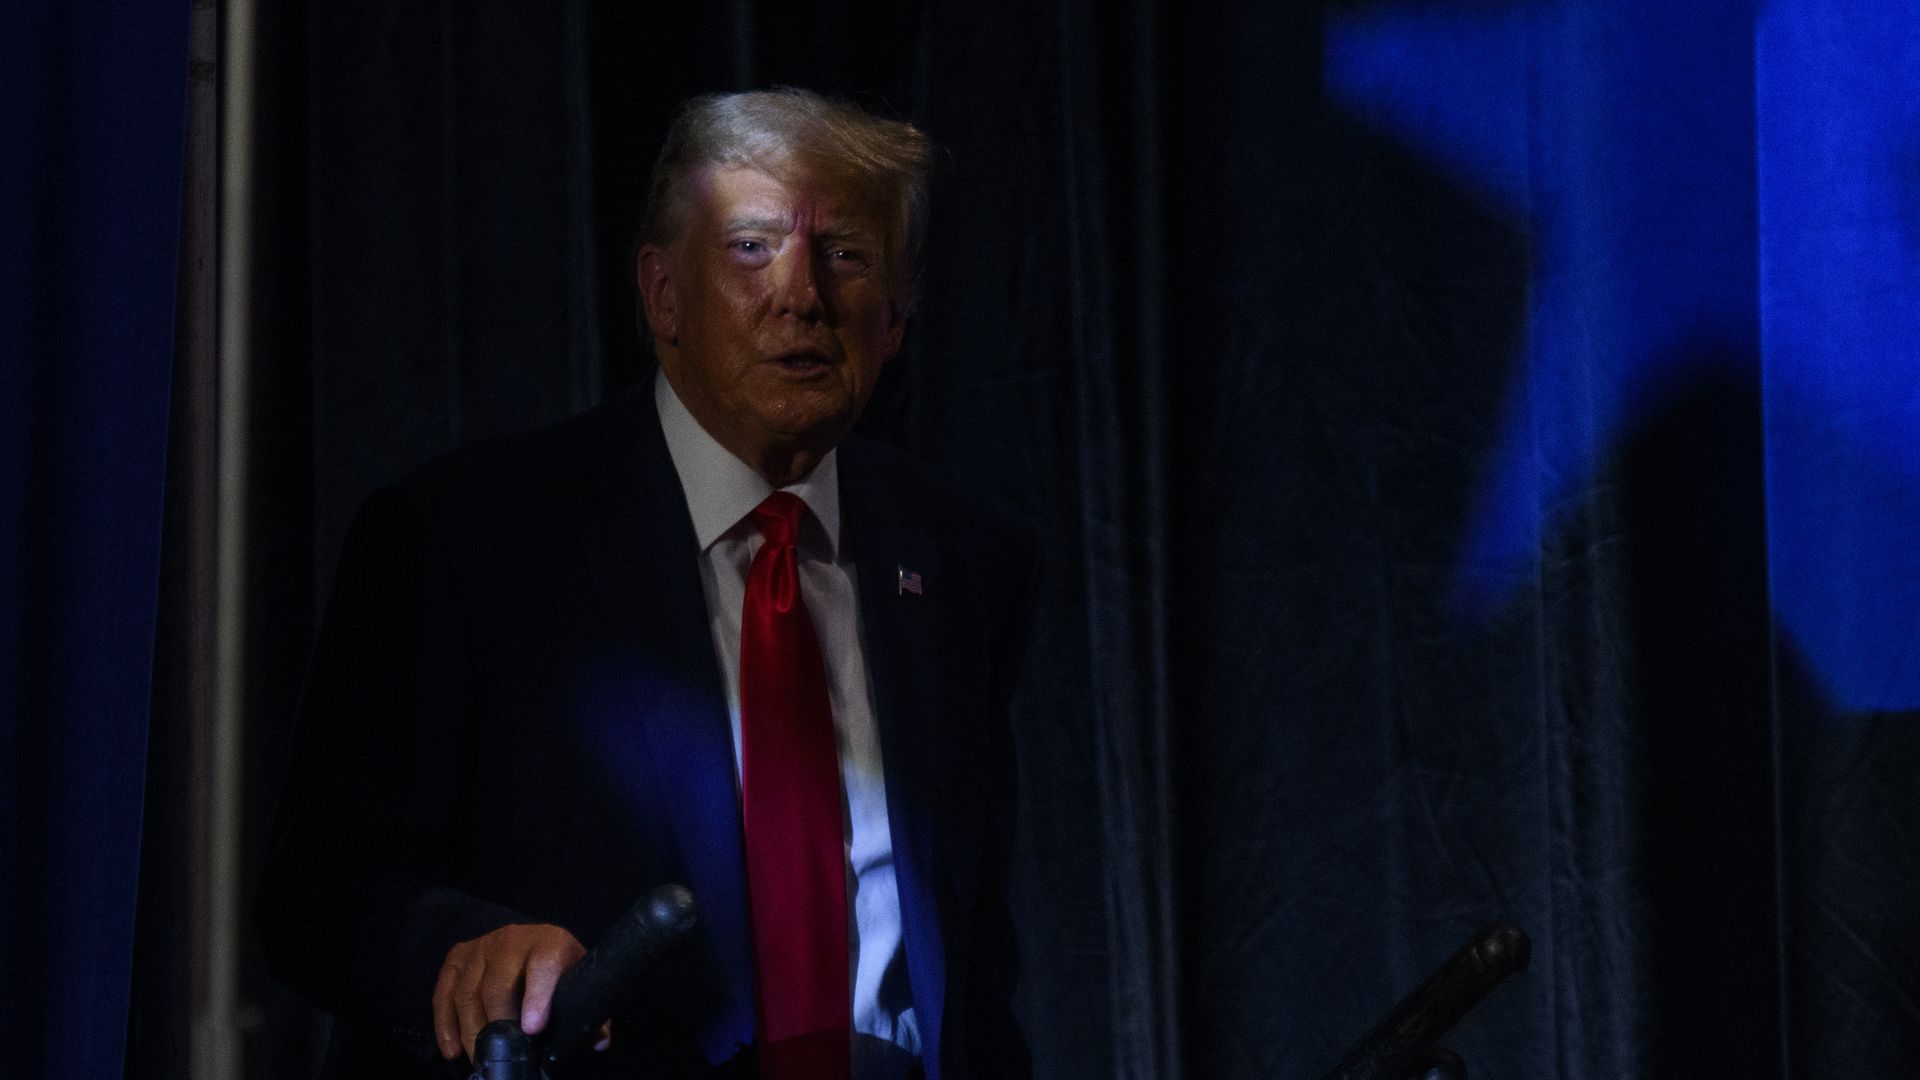 Former President Donald Trump takes the stage as the keynote speaker at the 56th Annual Silver Elephant Dinner hosted by the South Carolina Republican Party on August 5, 2023 in Columbia, South Carolina.